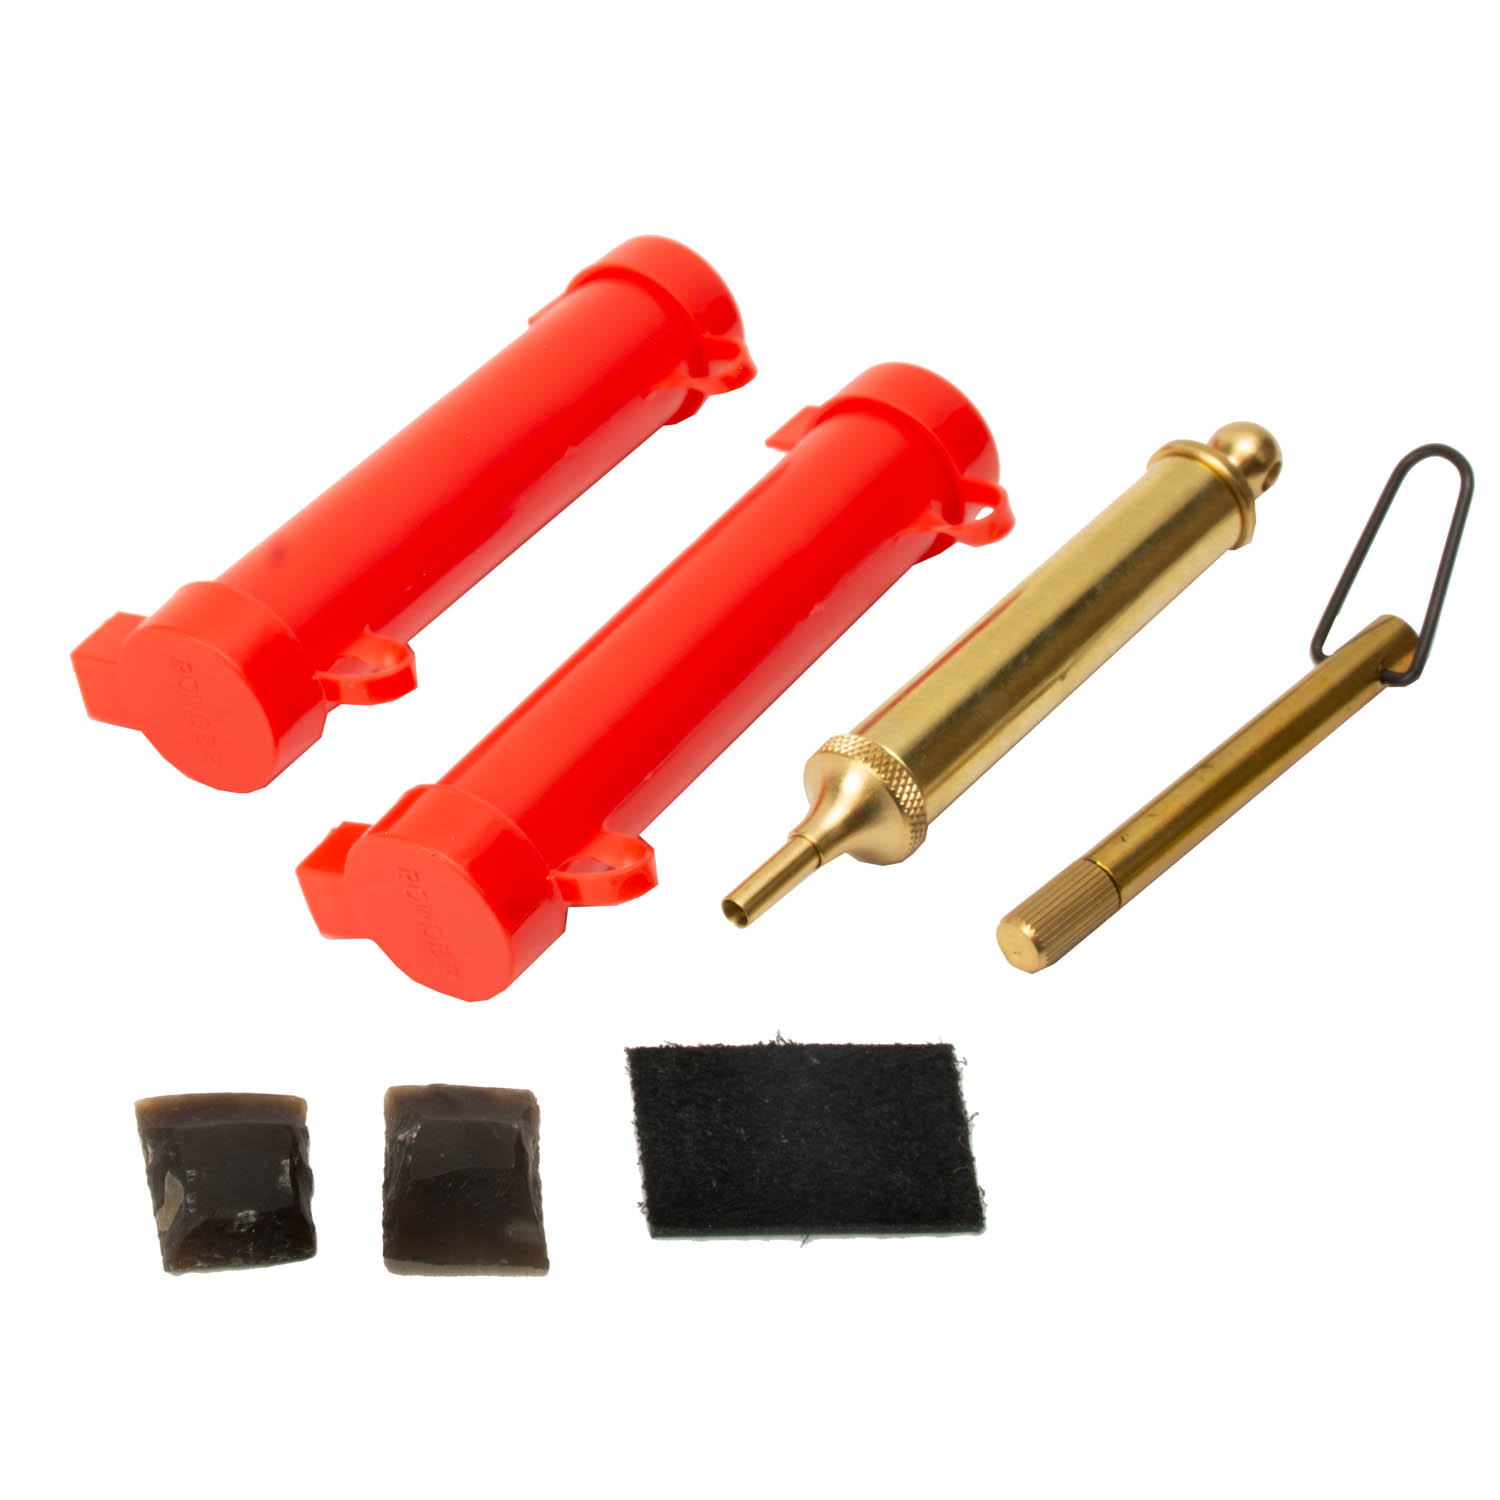 Traditions Flintlock Shooters KIT .50/.54 6 Accessories A3700